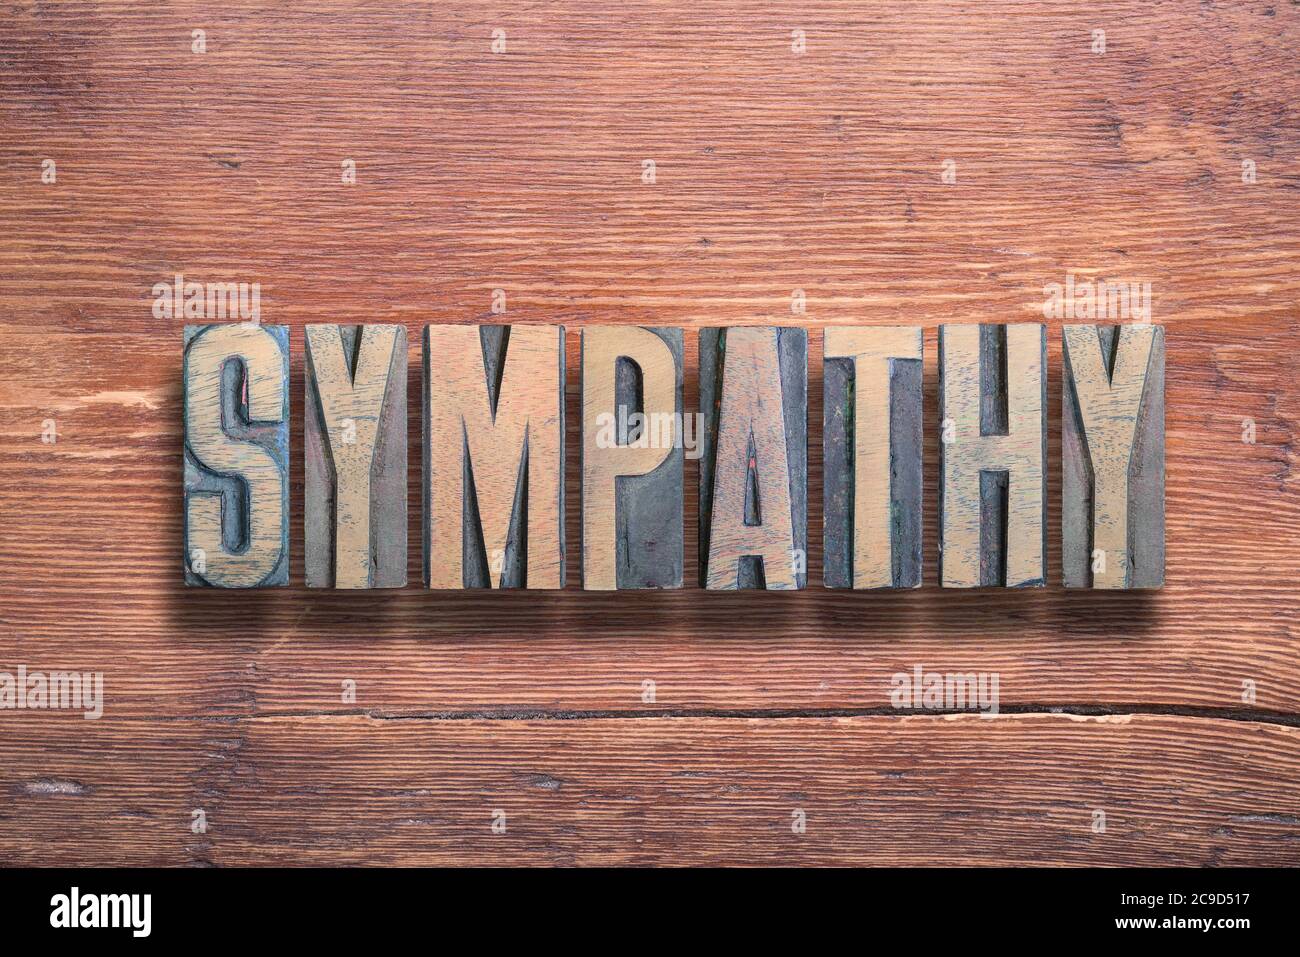 sympathy word combined on vintage varnished wooden surface Stock Photo